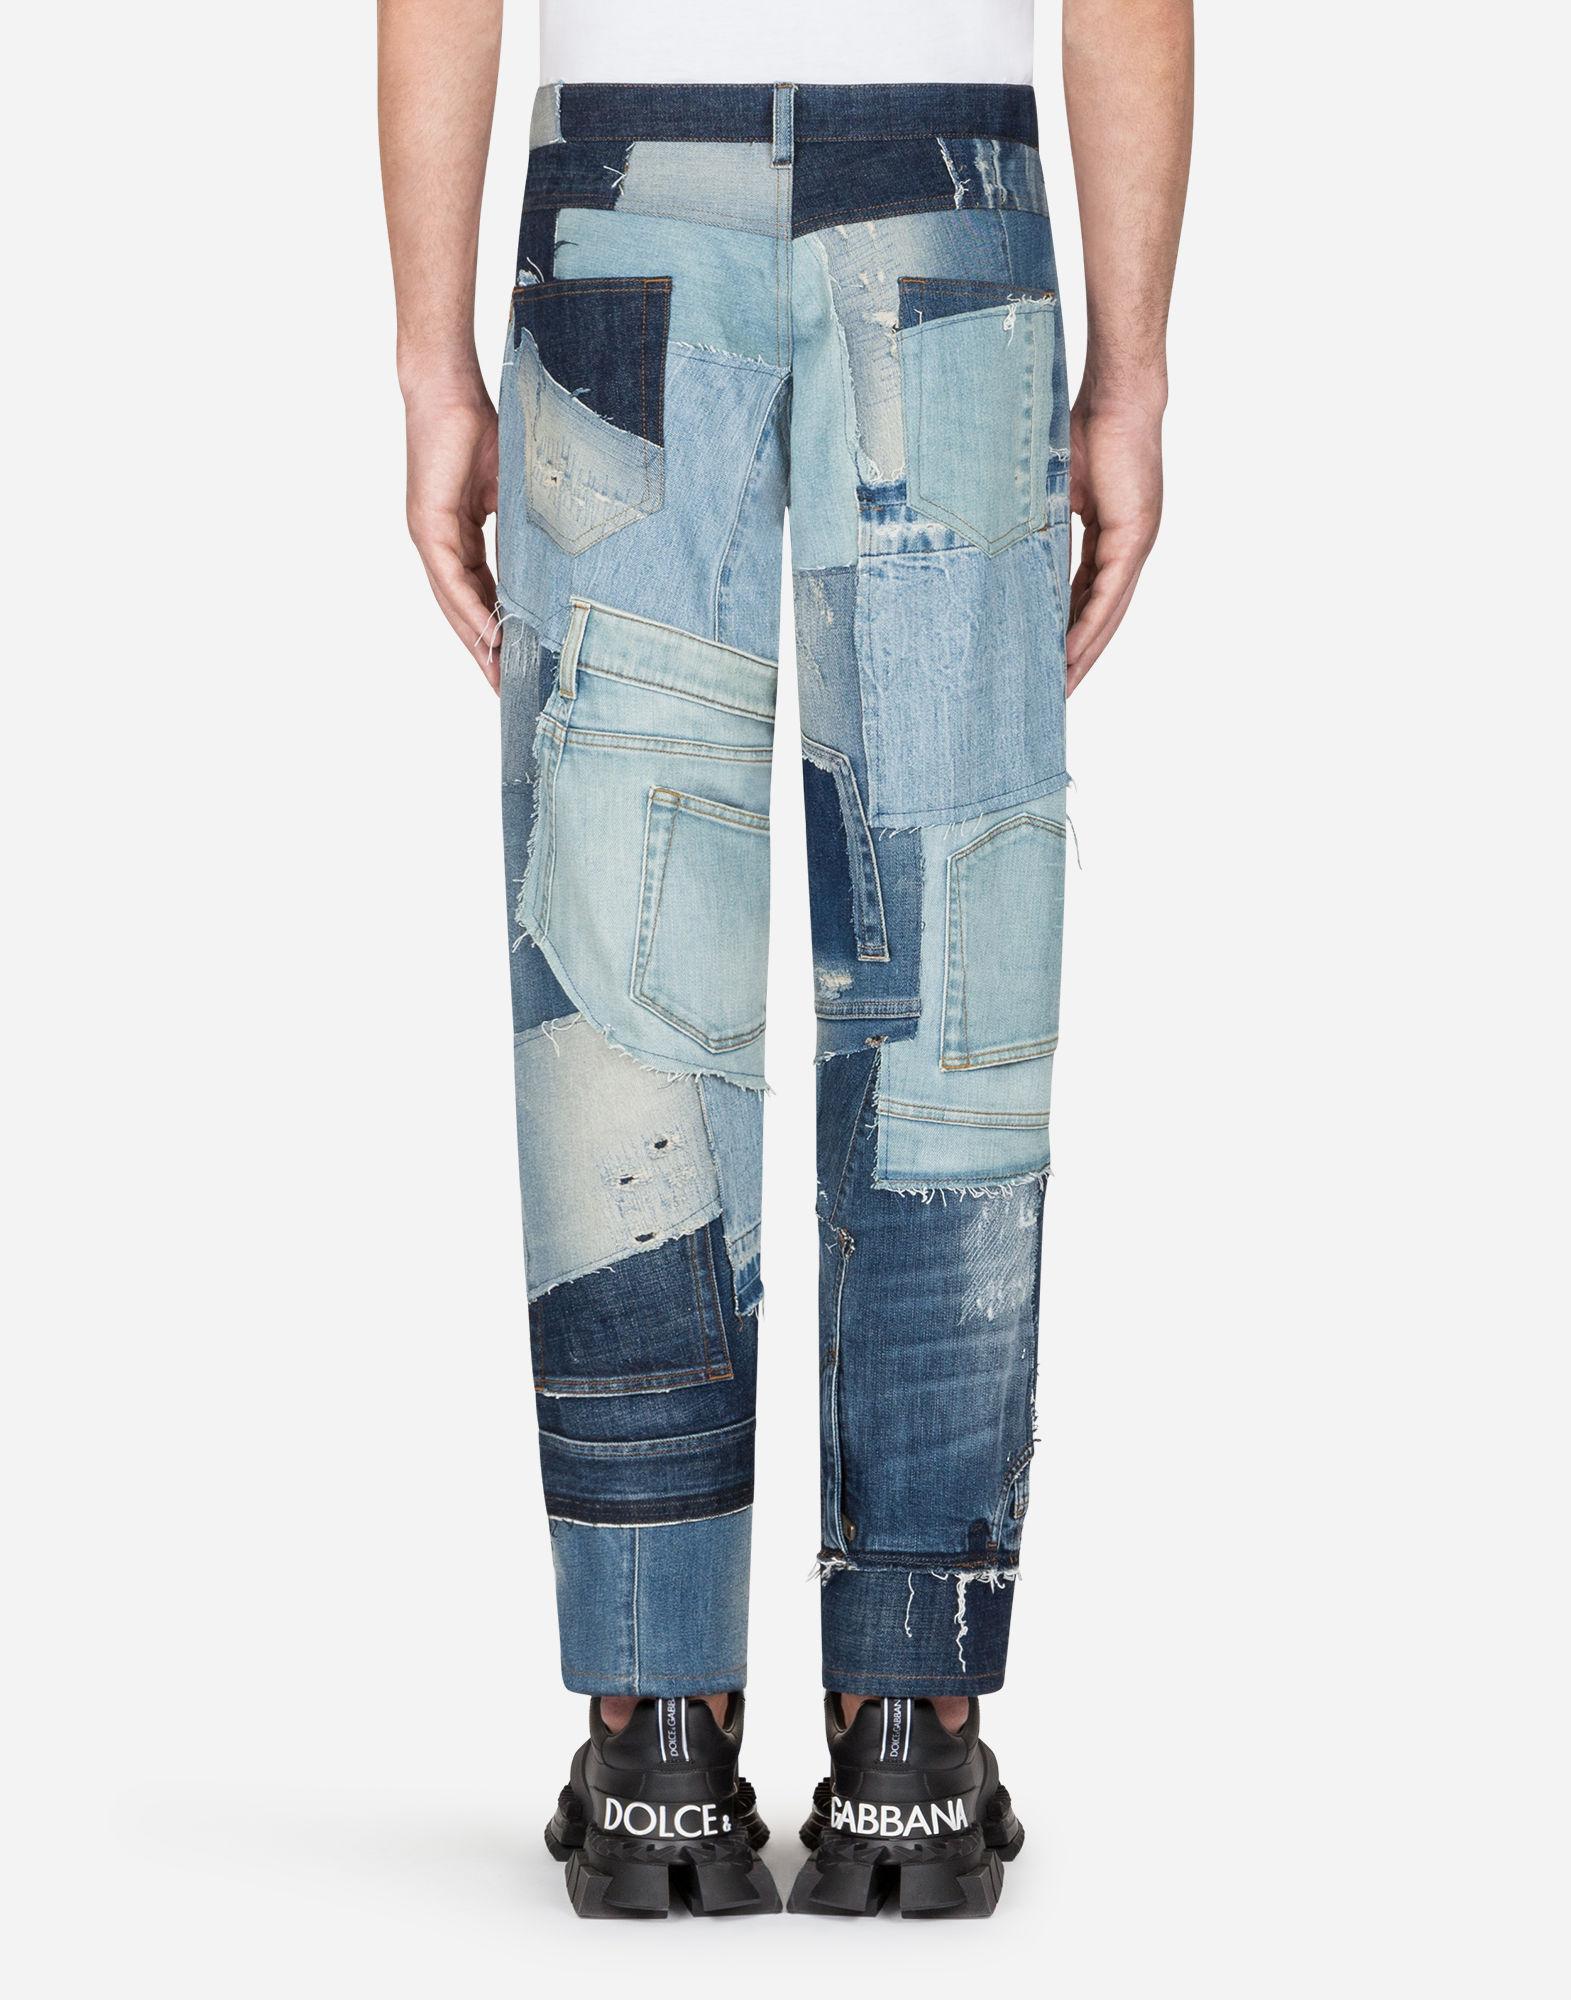 Dolce & Gabbana Loose Fit Patchwork Jeans in Blue for Men - Lyst